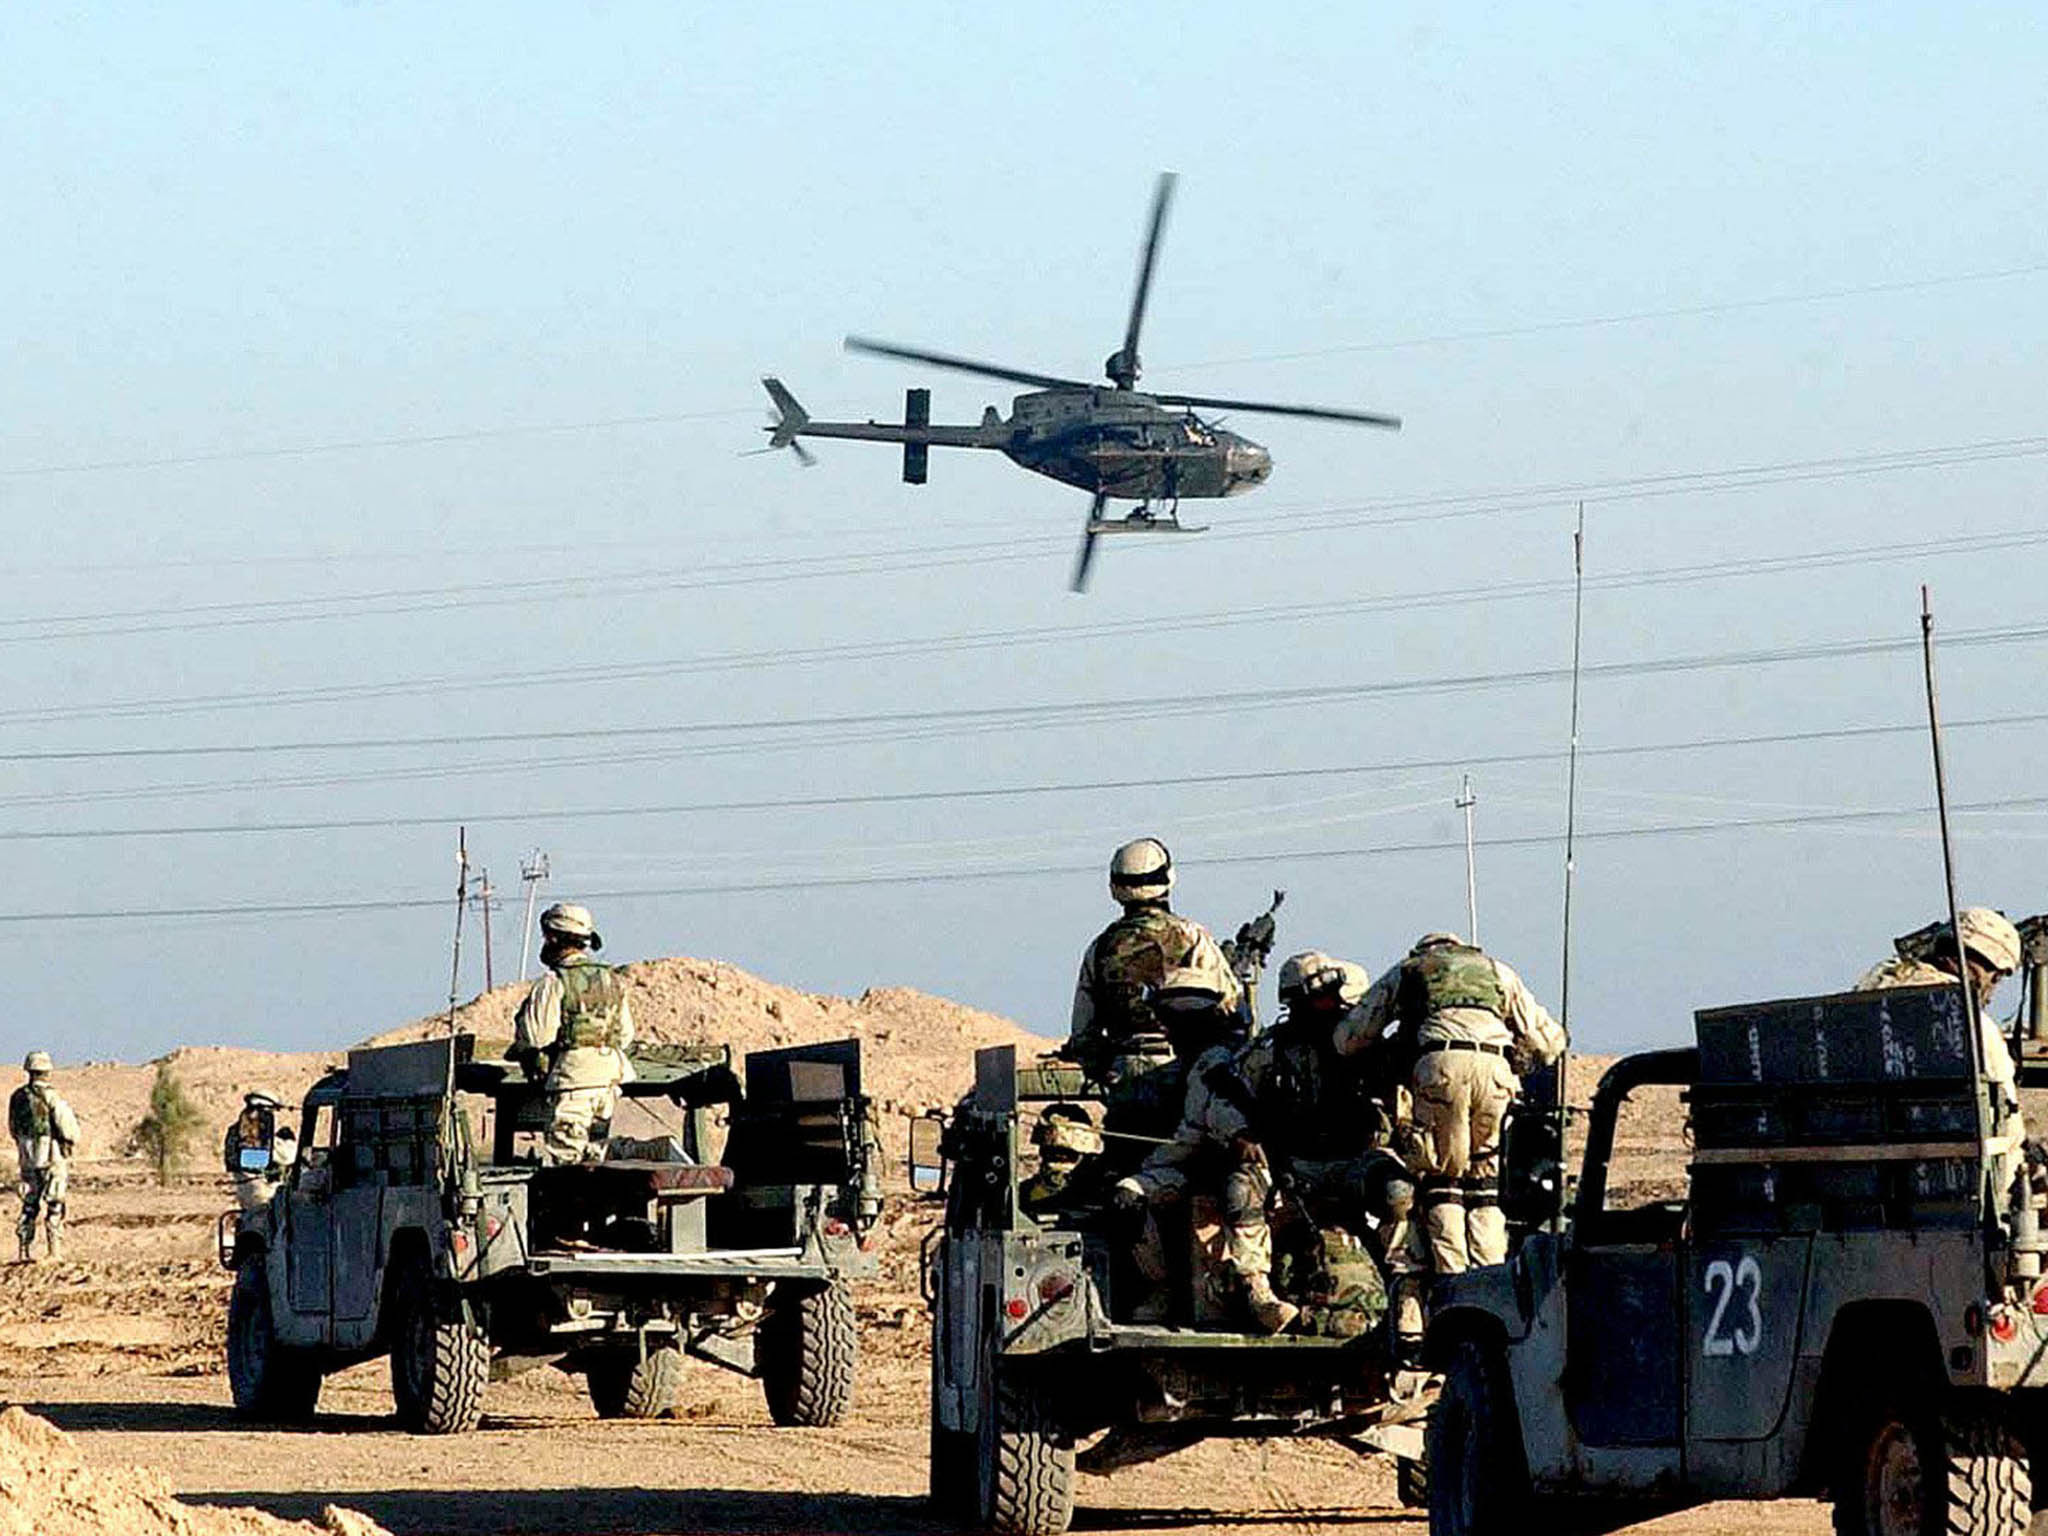 Members of Bravo company 1/505 Parachute Infantry Regiment 82nd Airborne Division conducting a mounted patrol in Al Fallujah, 21 Dec 2003